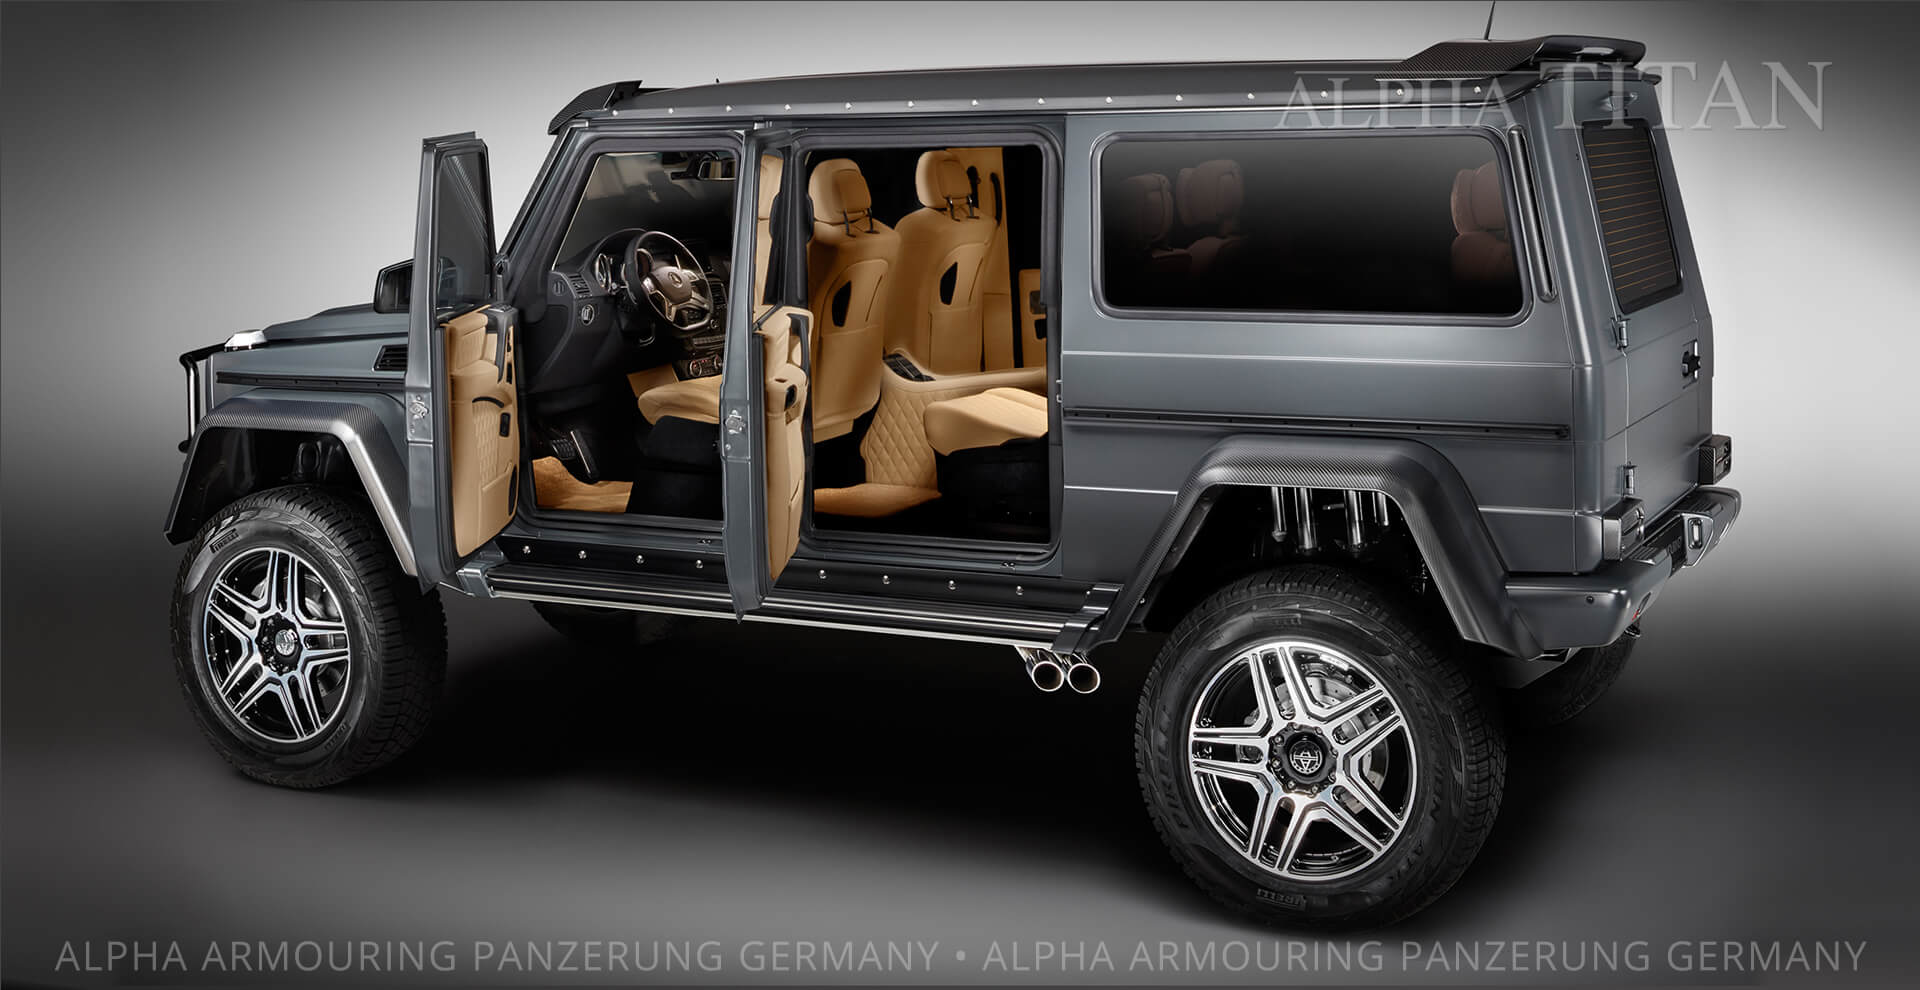 Armored Vehicles Suvs Invisible Armoured Cars Made In Germany Bulletproof Security Protected Vehicles Alpha Armouring